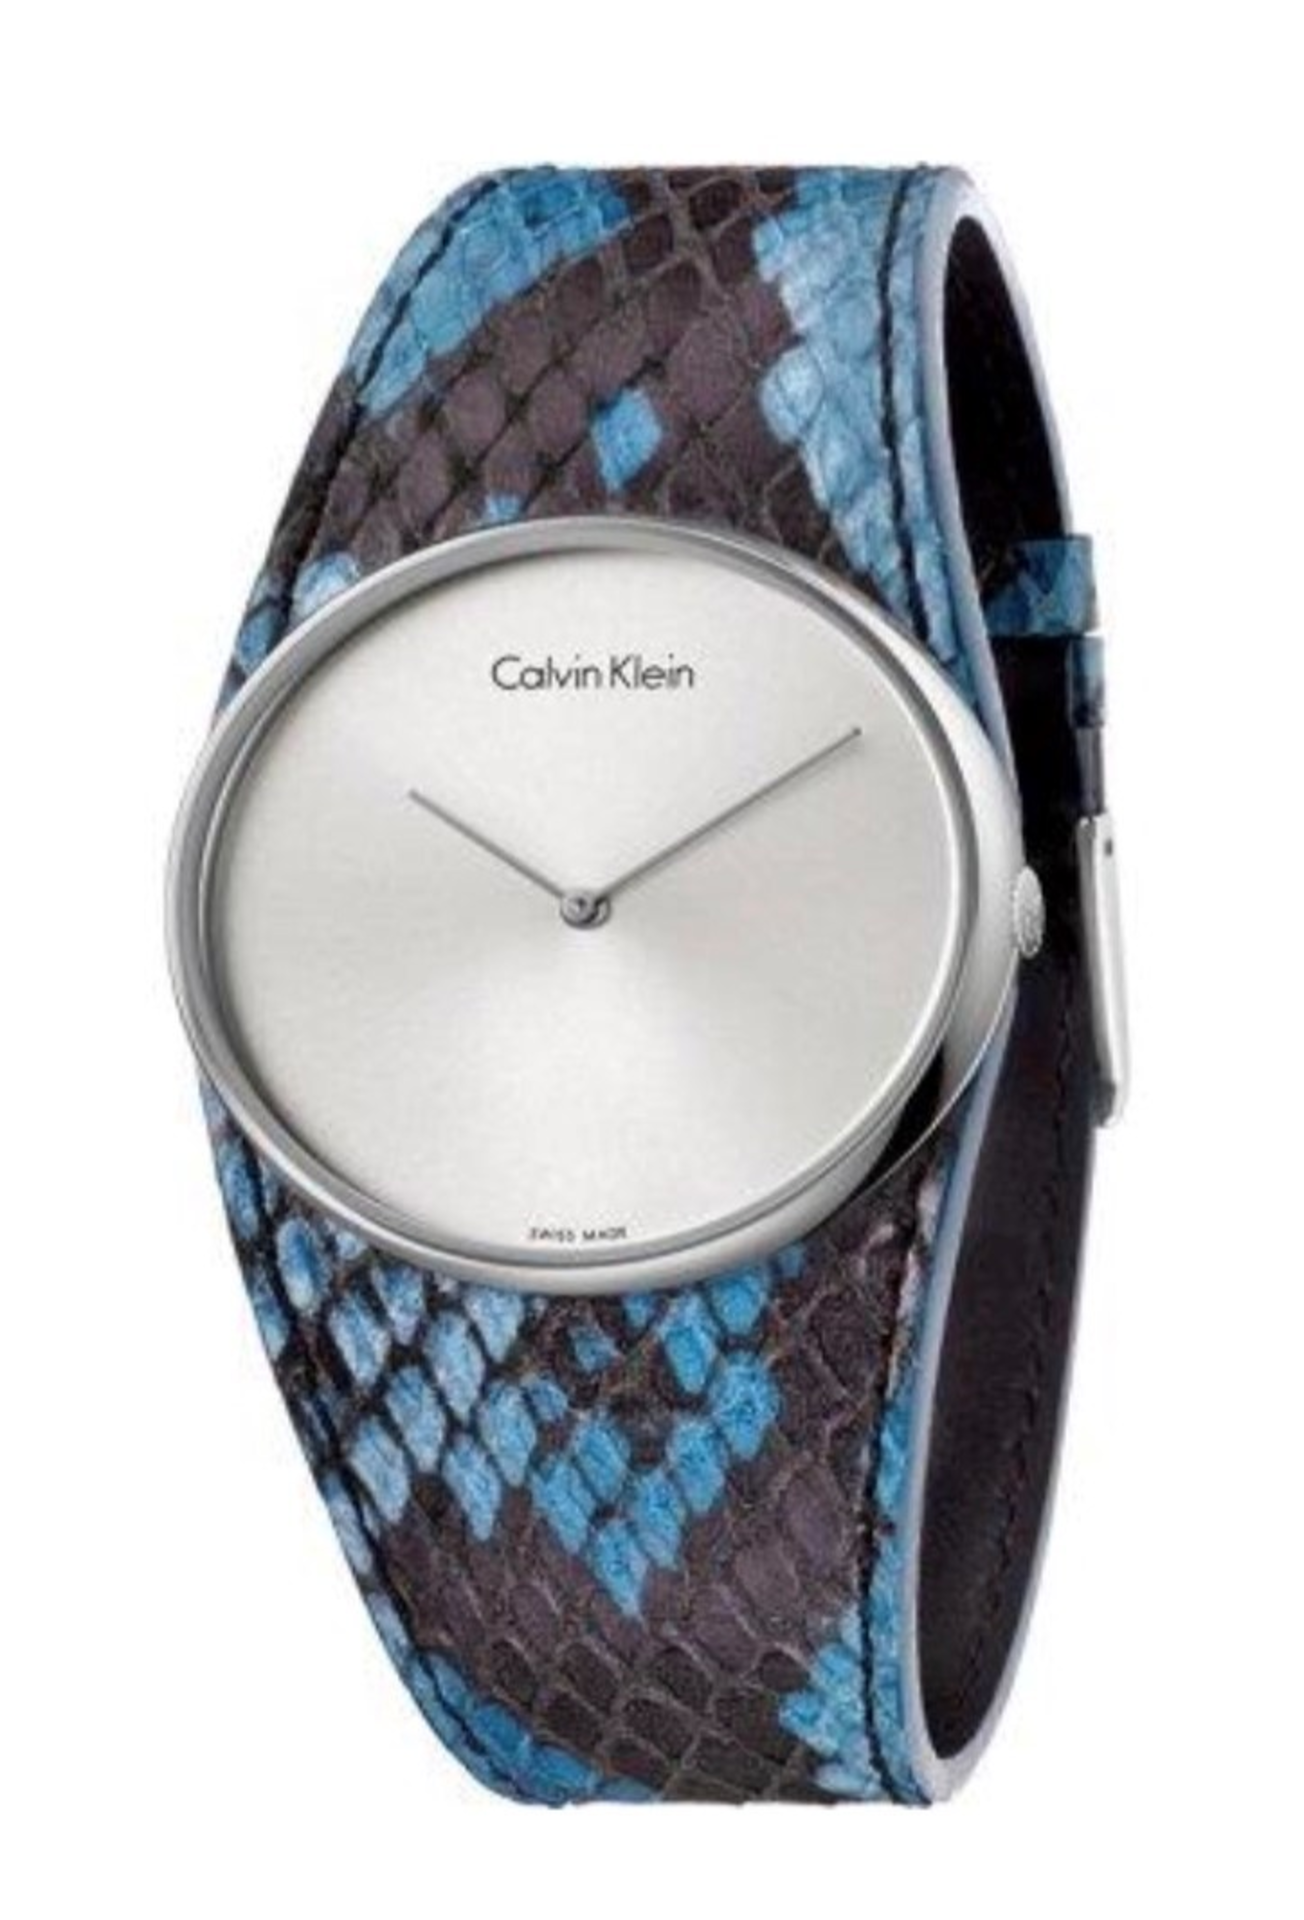 BRAND NEW RETAIL BOXED WOMENS CALVIN KLEIN WATCH RRP £219